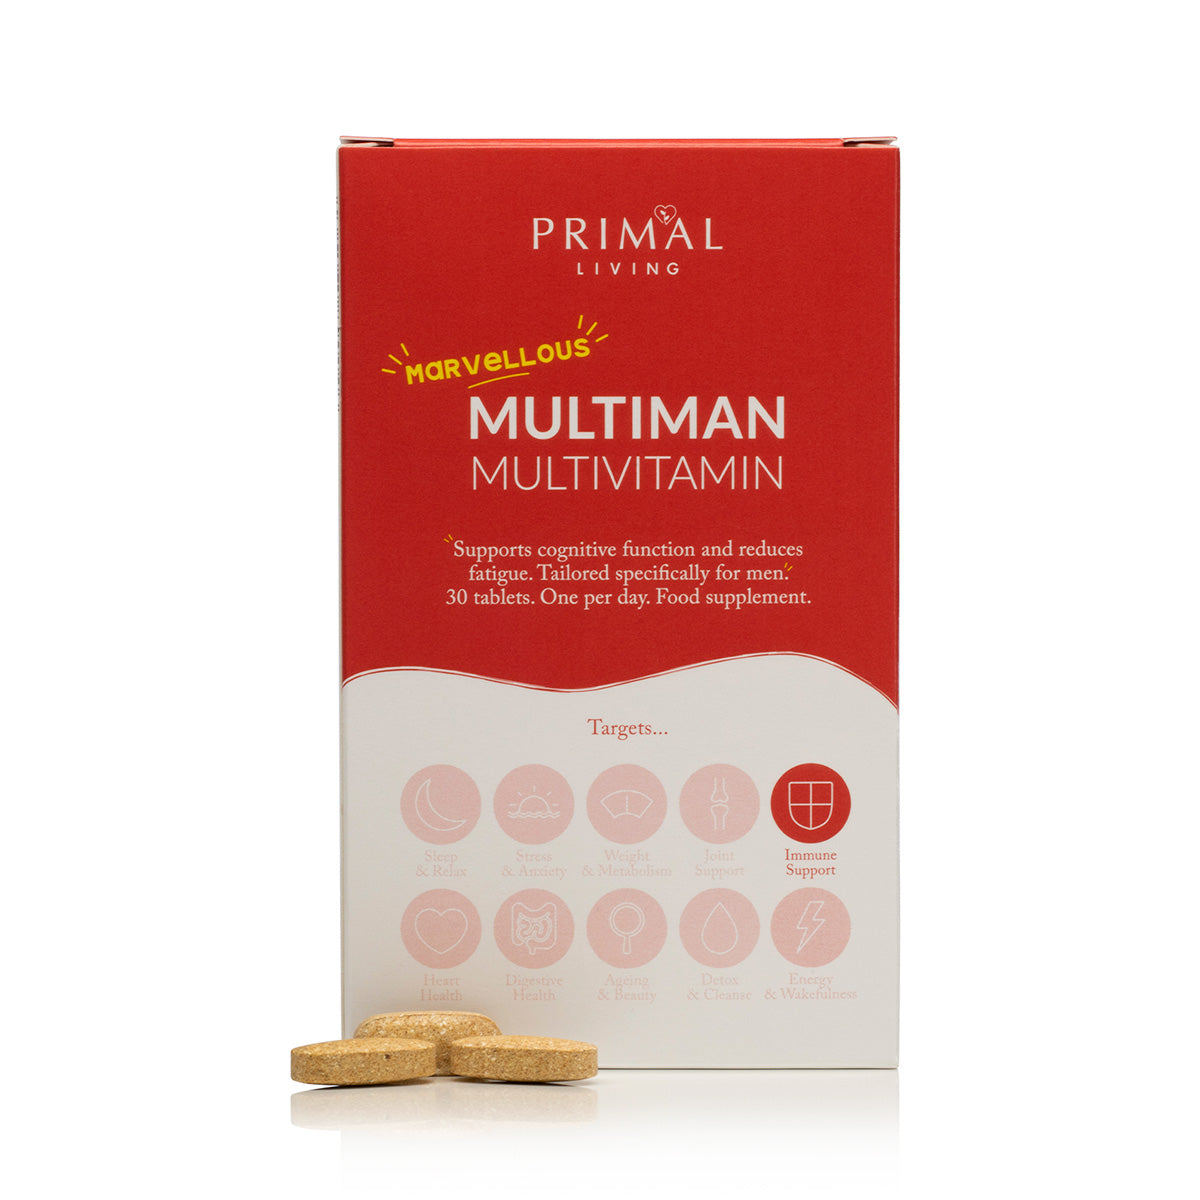 Multiman Multivitamin (ages 18 to 40+)